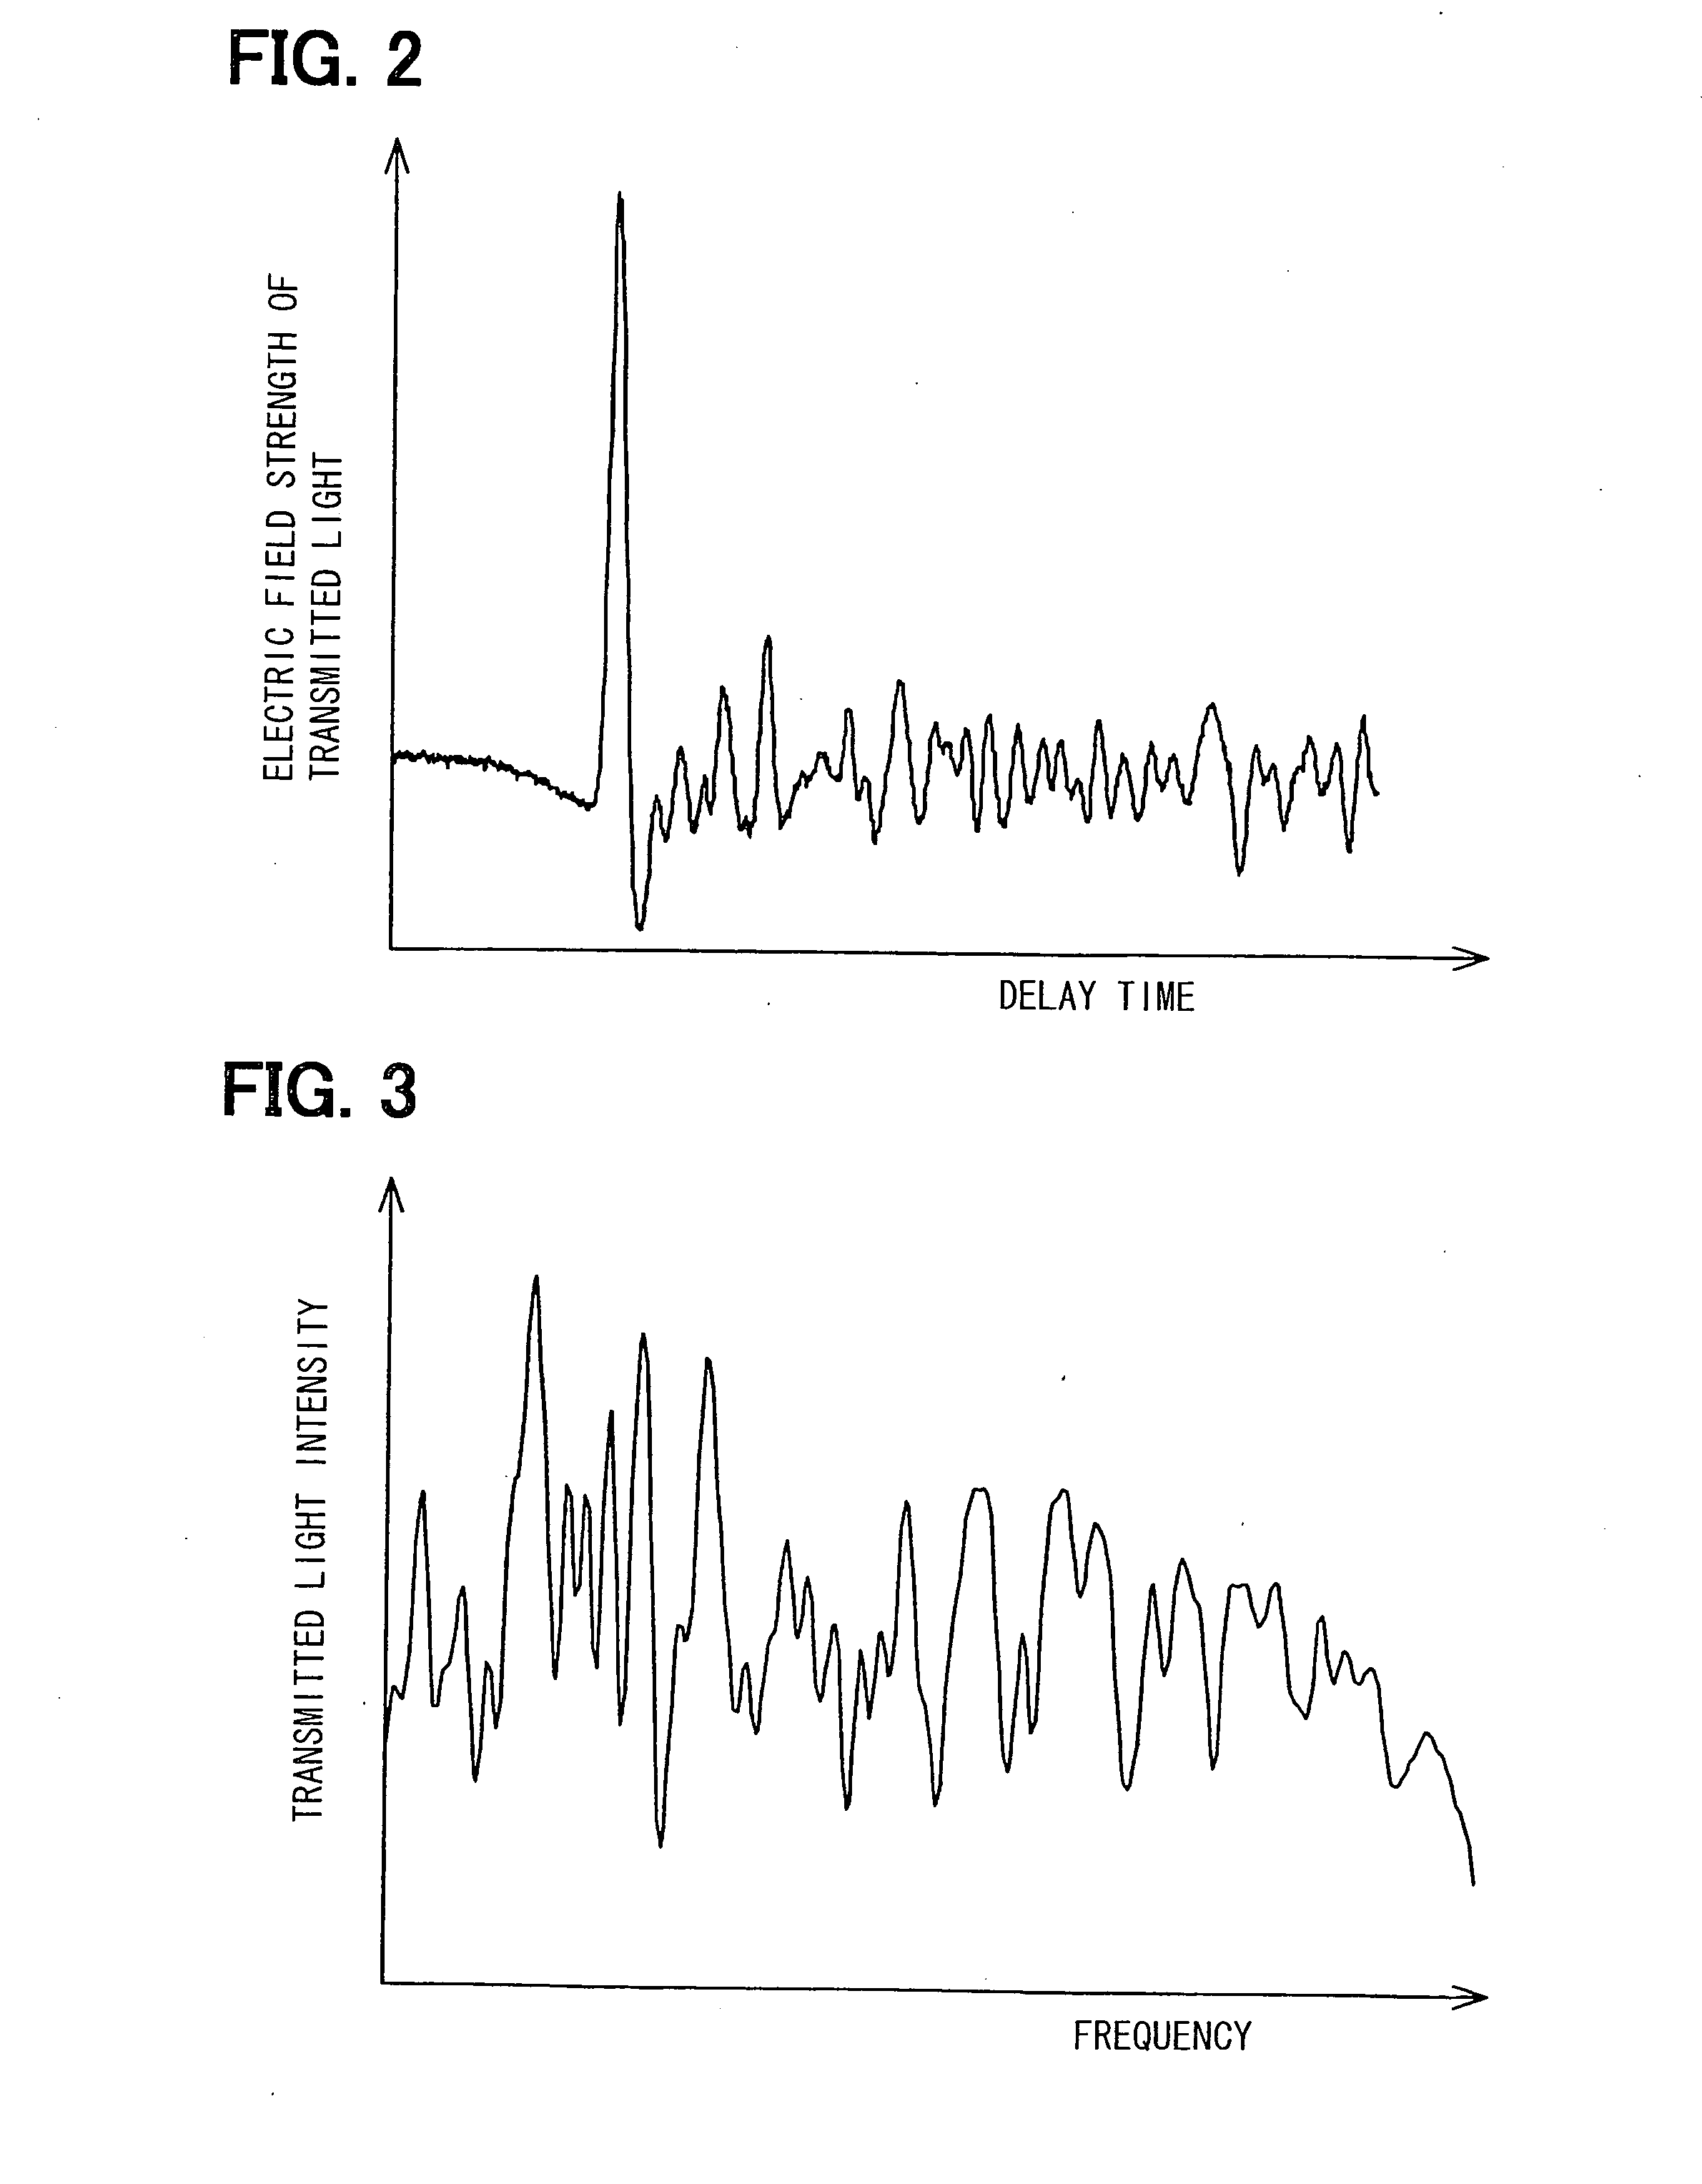 Apparatus of absorption spectroscopy for gaseous samples